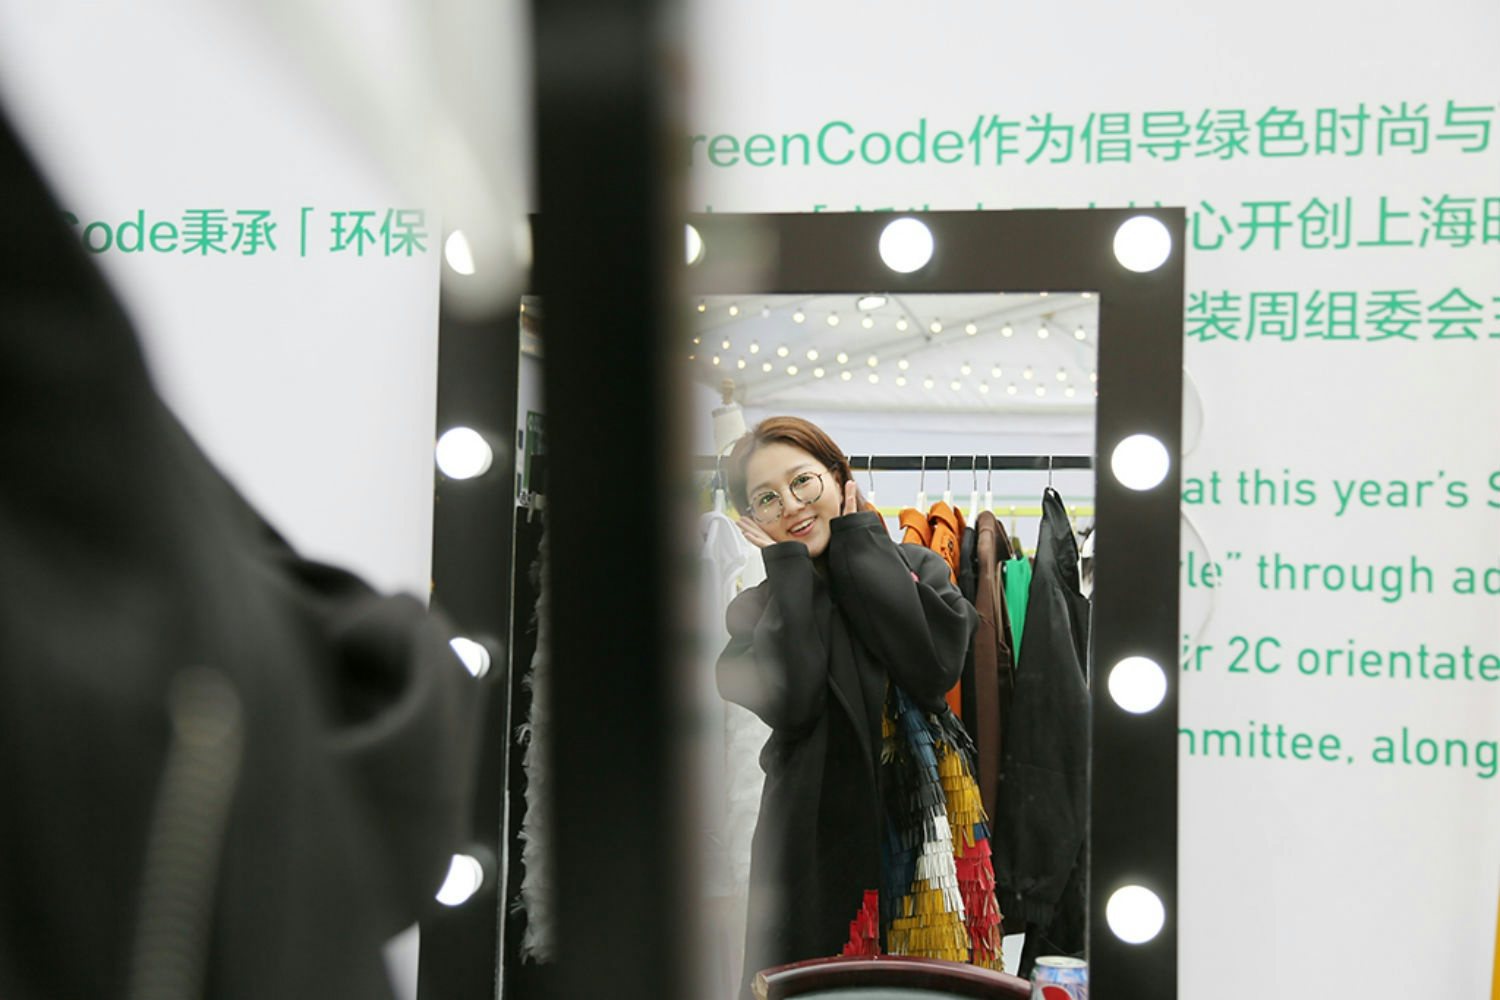 A customer tries out a new look at Chinese celebrity fashion blogger BoyNam's wardrobe, a GreenCode workshop that helps consumers with styling tips. (Courtesy Photo)